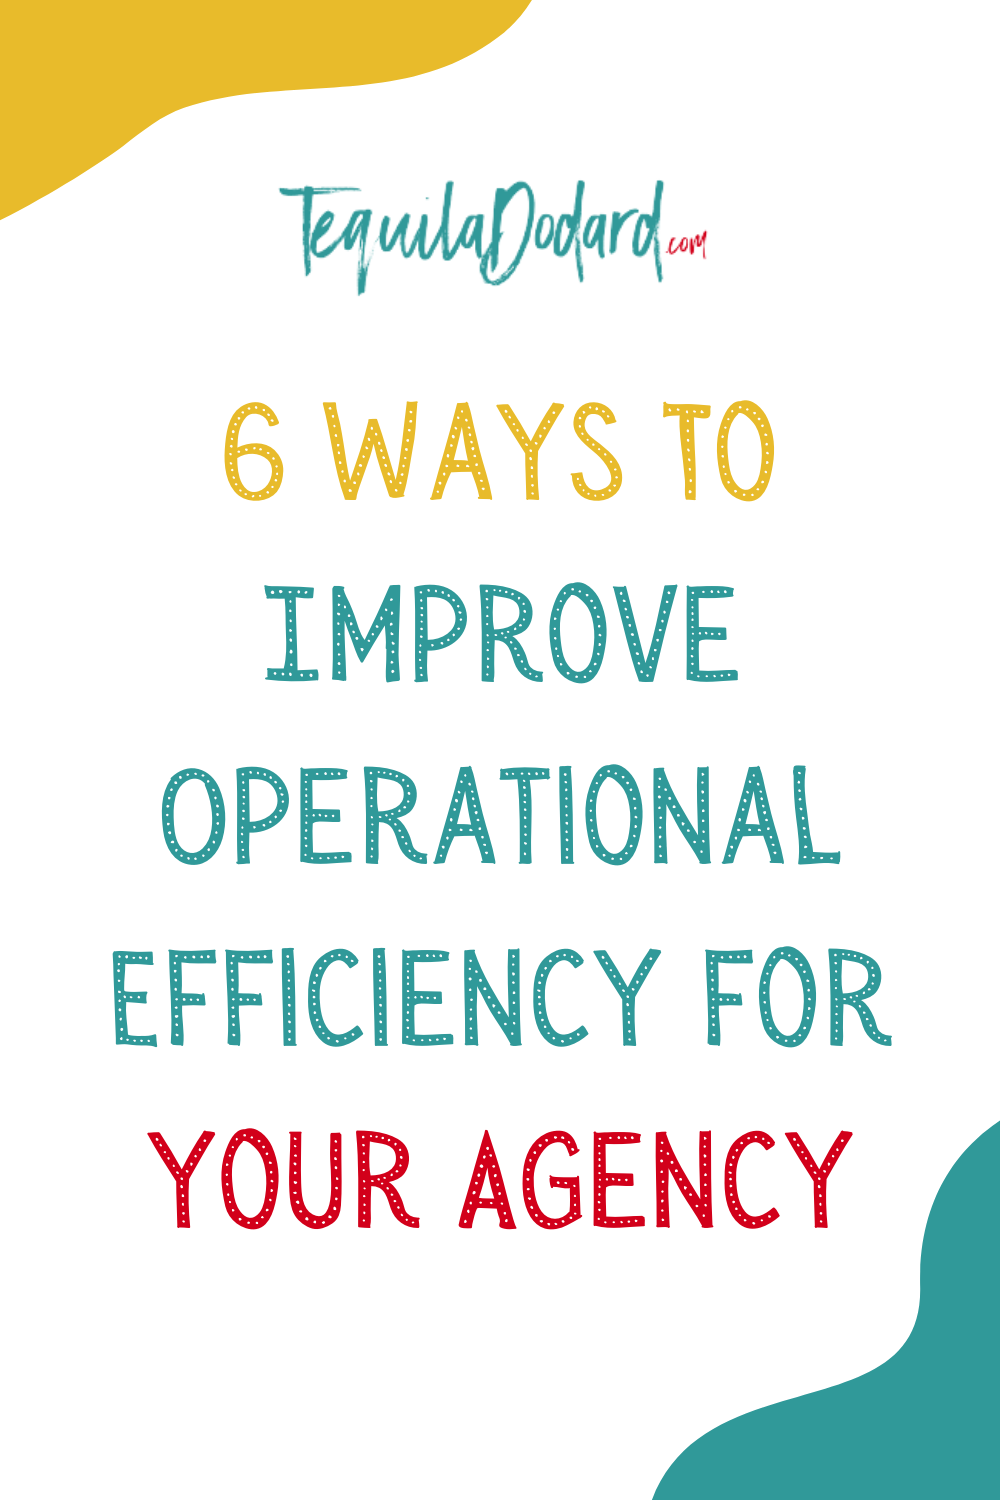 Improve Operational Efficiency for your Agency